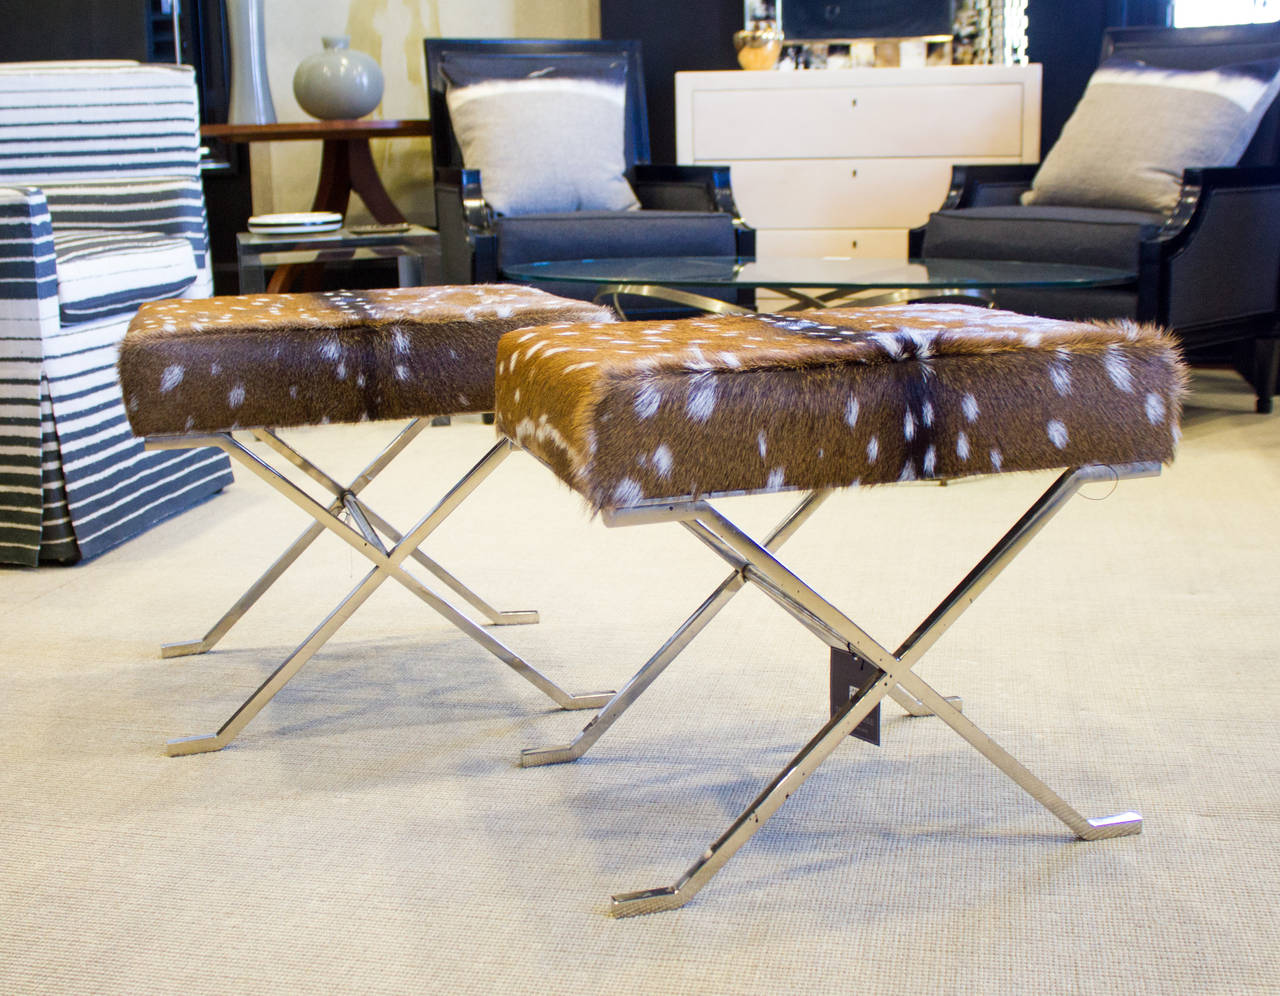 Vintage Jean-Michel Frank inspired chrome benches, upholstered in antelope hide.